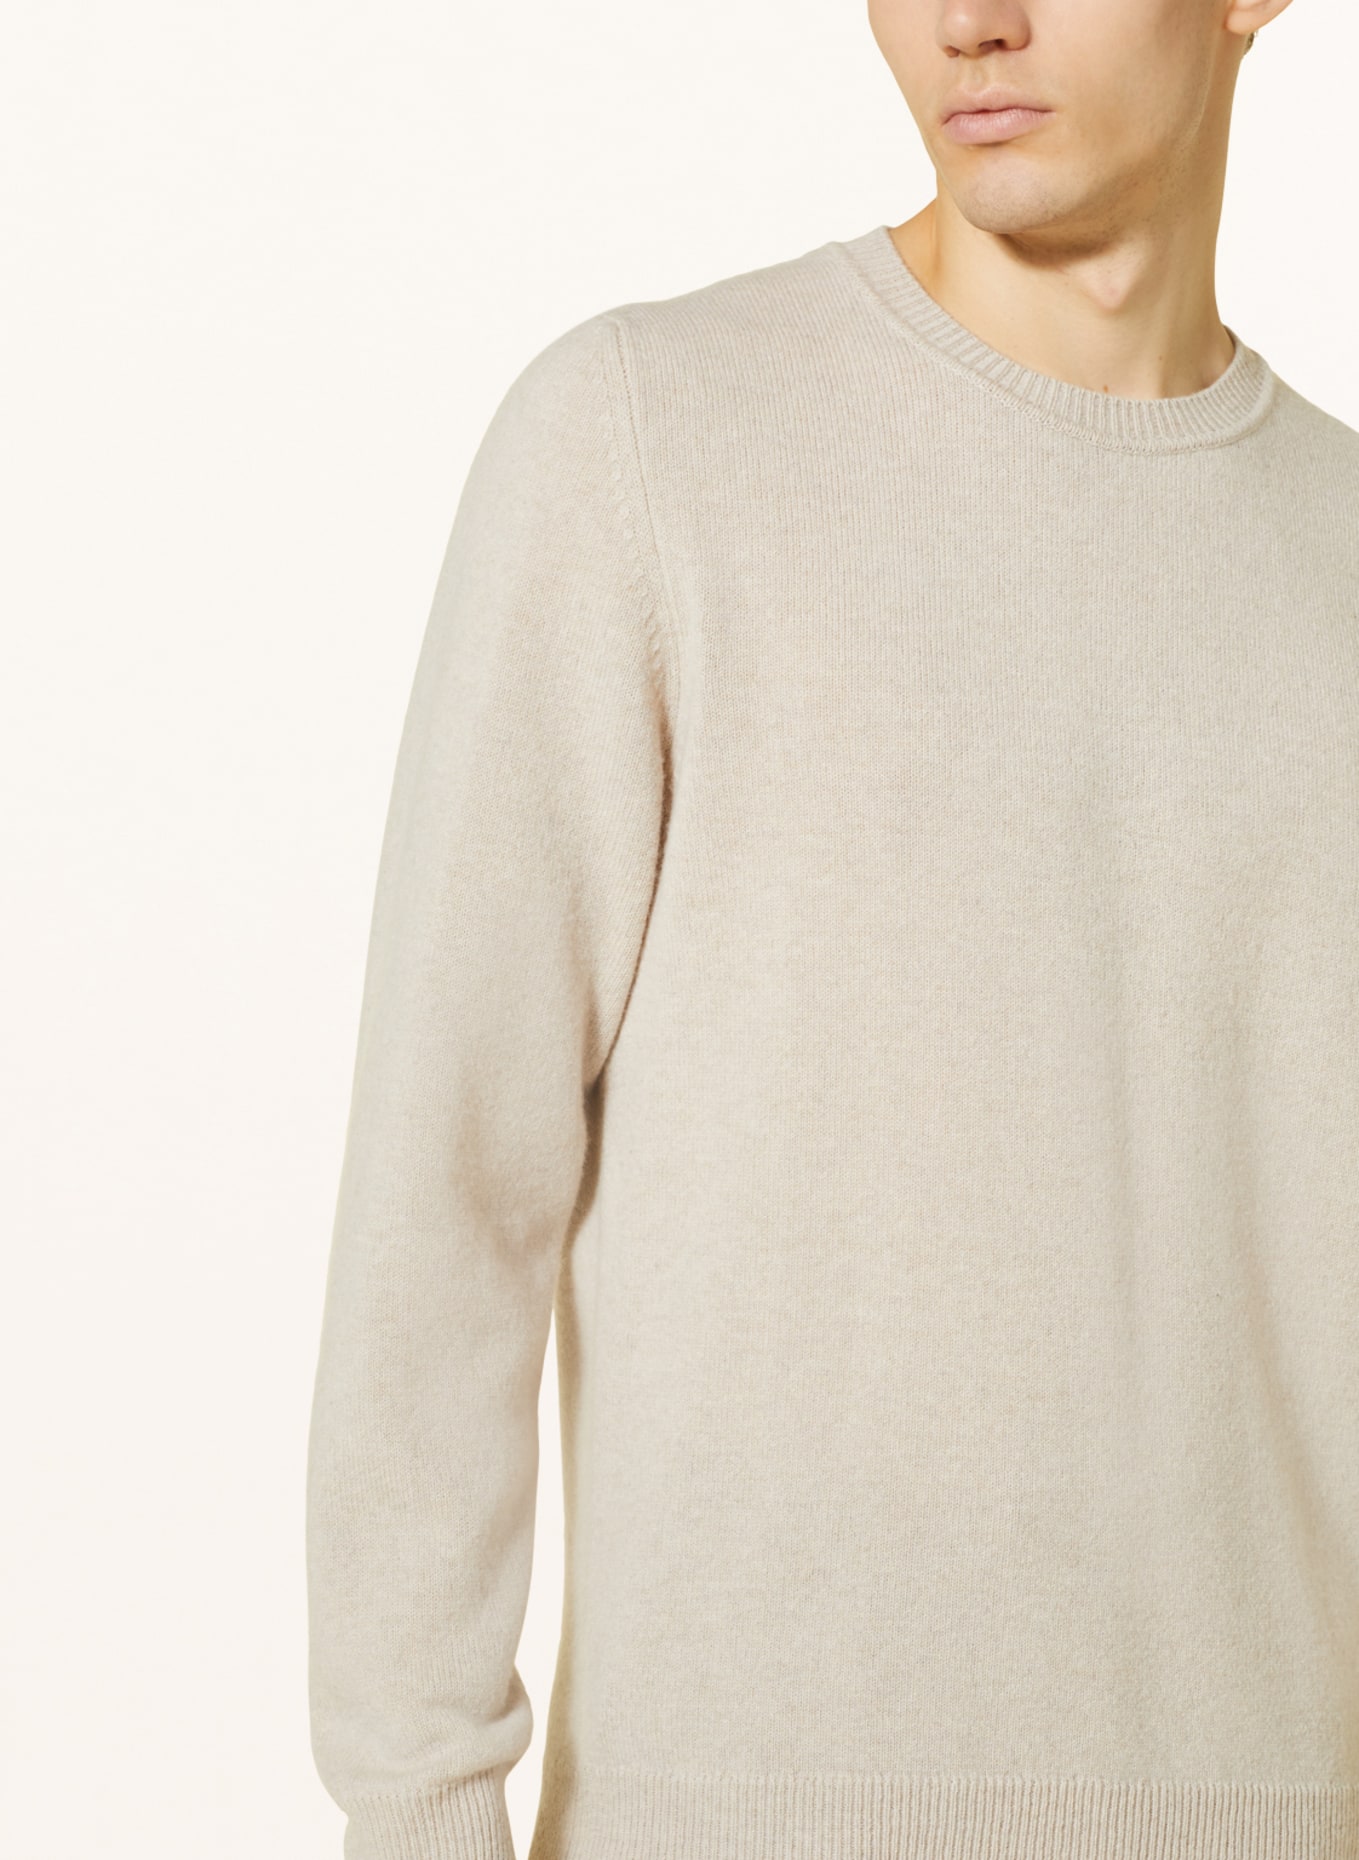 NORSE PROJECTS Pullover SIGFRED, Farbe: CREME (Bild 4)